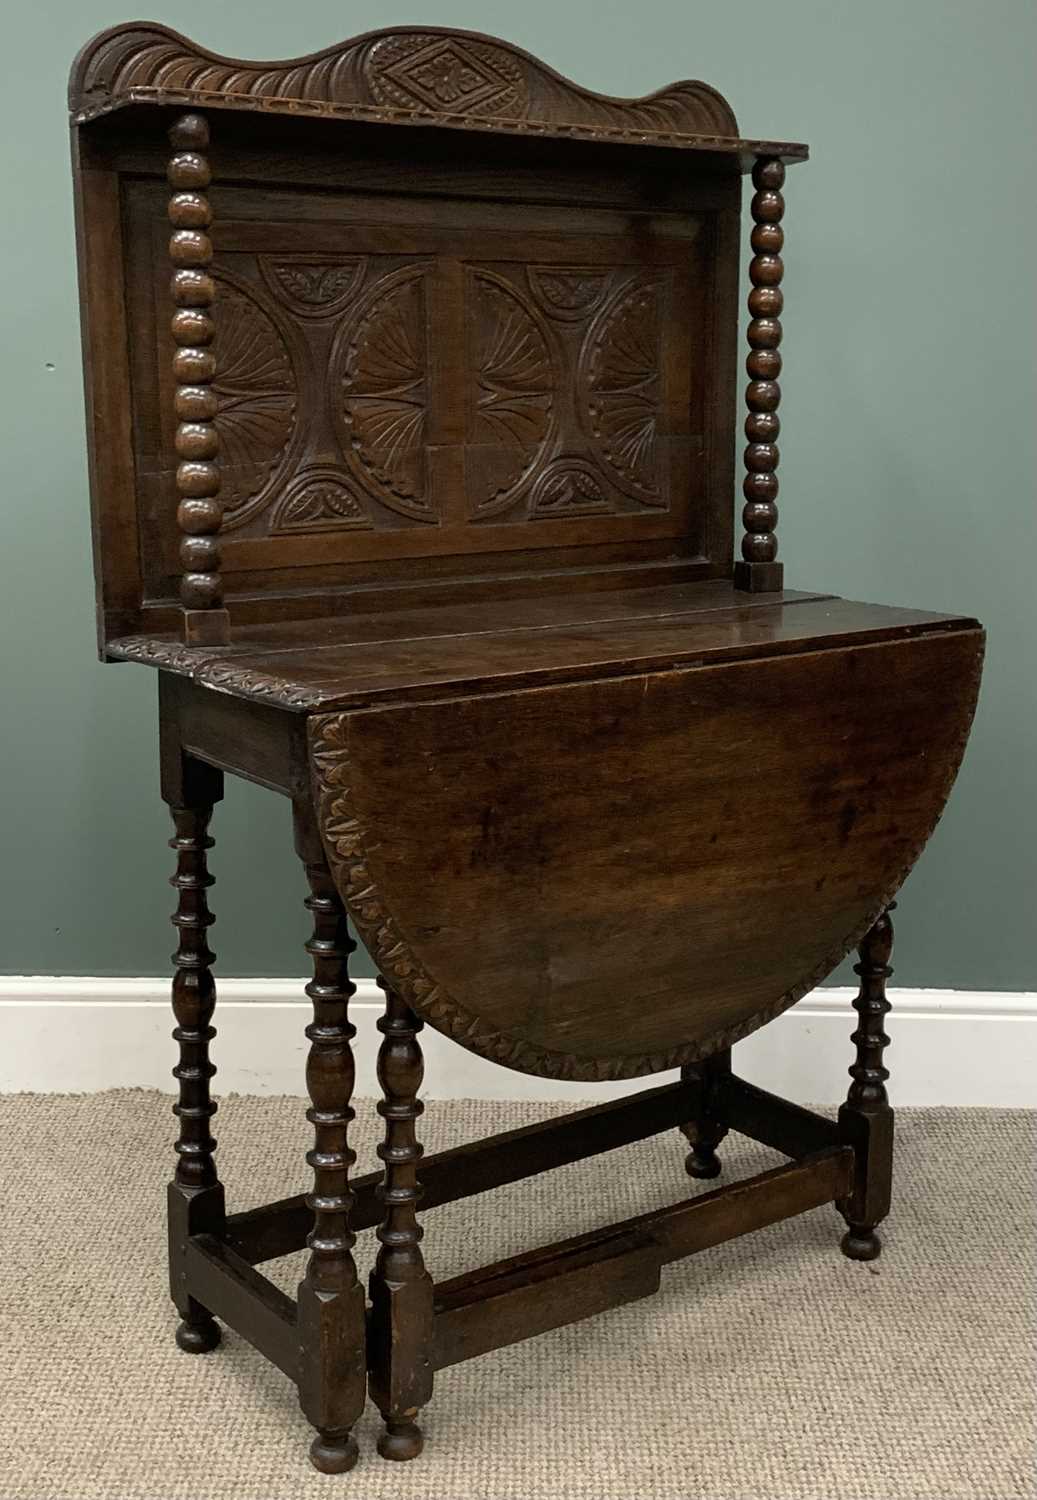 ANTIQUE DROP-LEAF TABLE UNSUALLY MARRIED WITH RAIL-BACK both elements carved, 136 (h) x 85 (w) x - Image 2 of 3